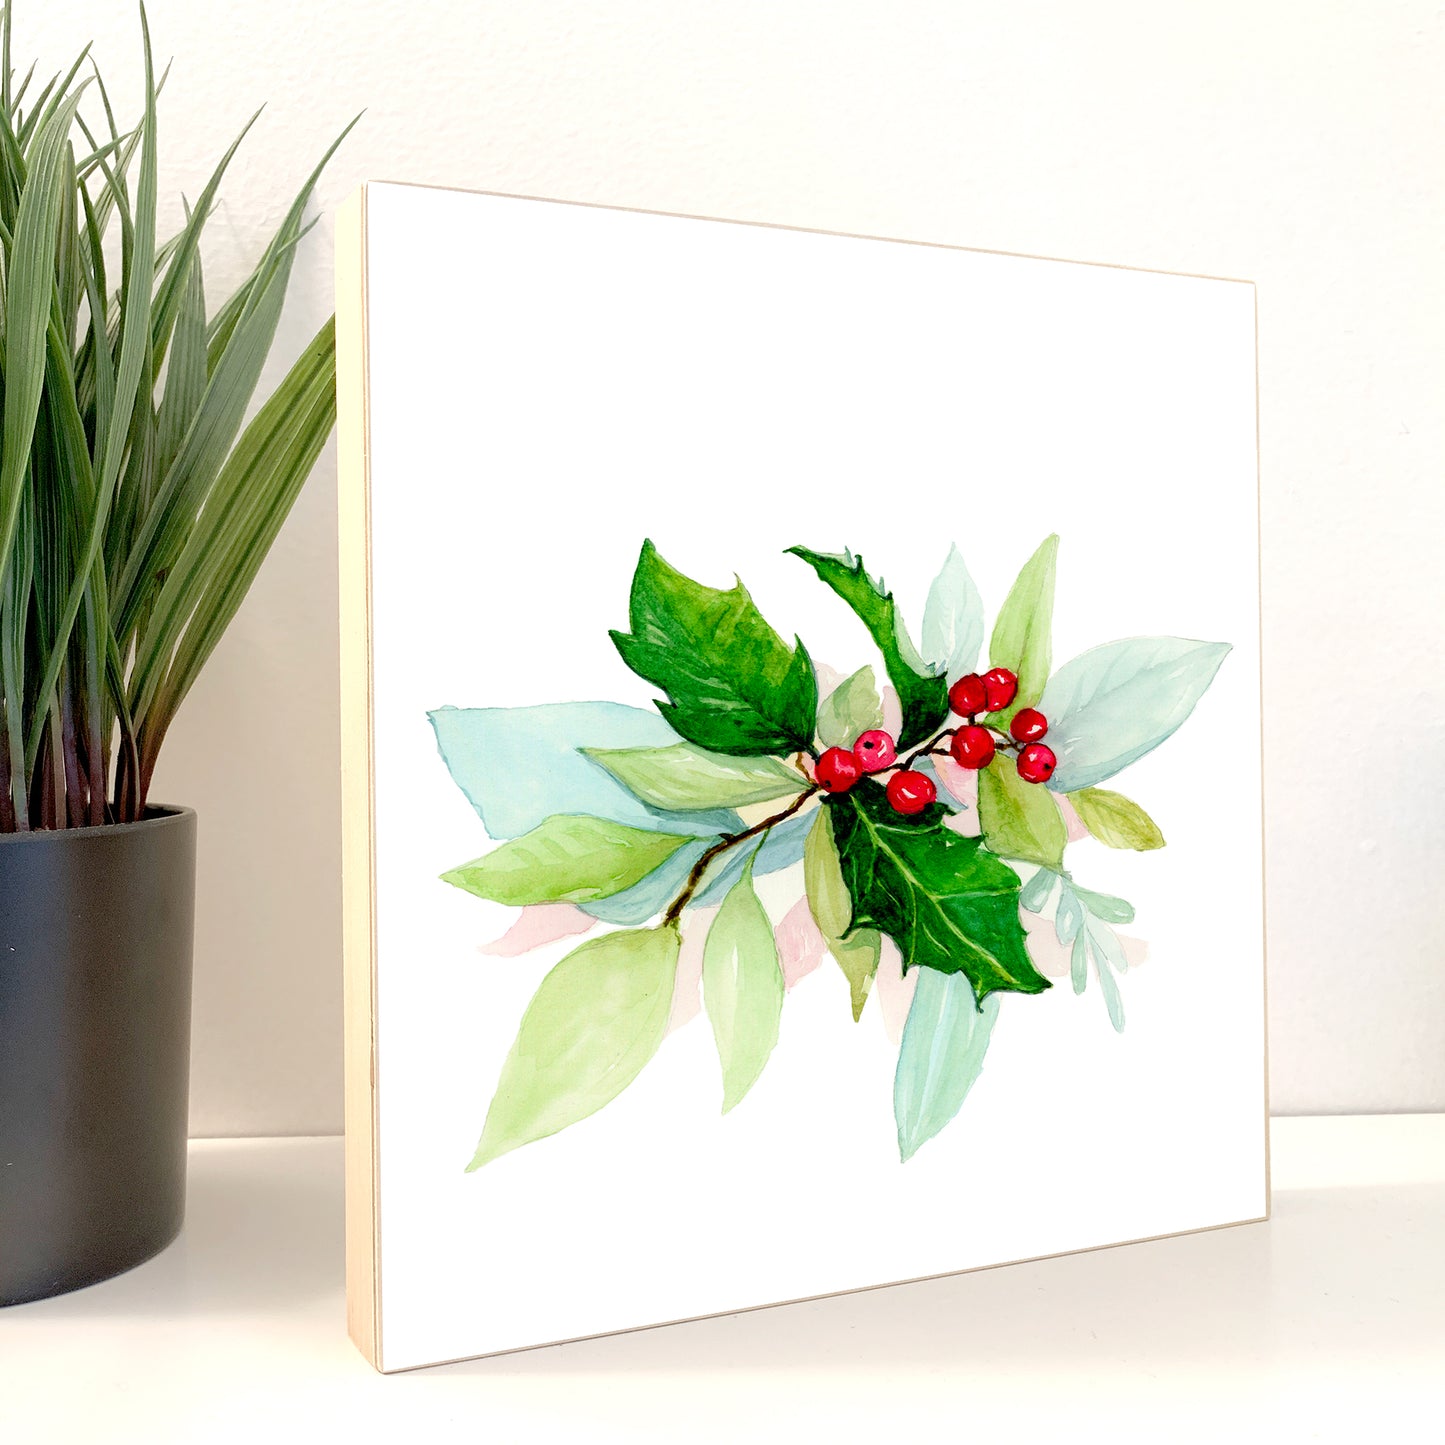 CHRISTMAS - Holly Berries on Wood Block 5x5 or 8x8. Original Watercolor Painting - Flamingo Shores - Original Art for Home Decor and Gifts